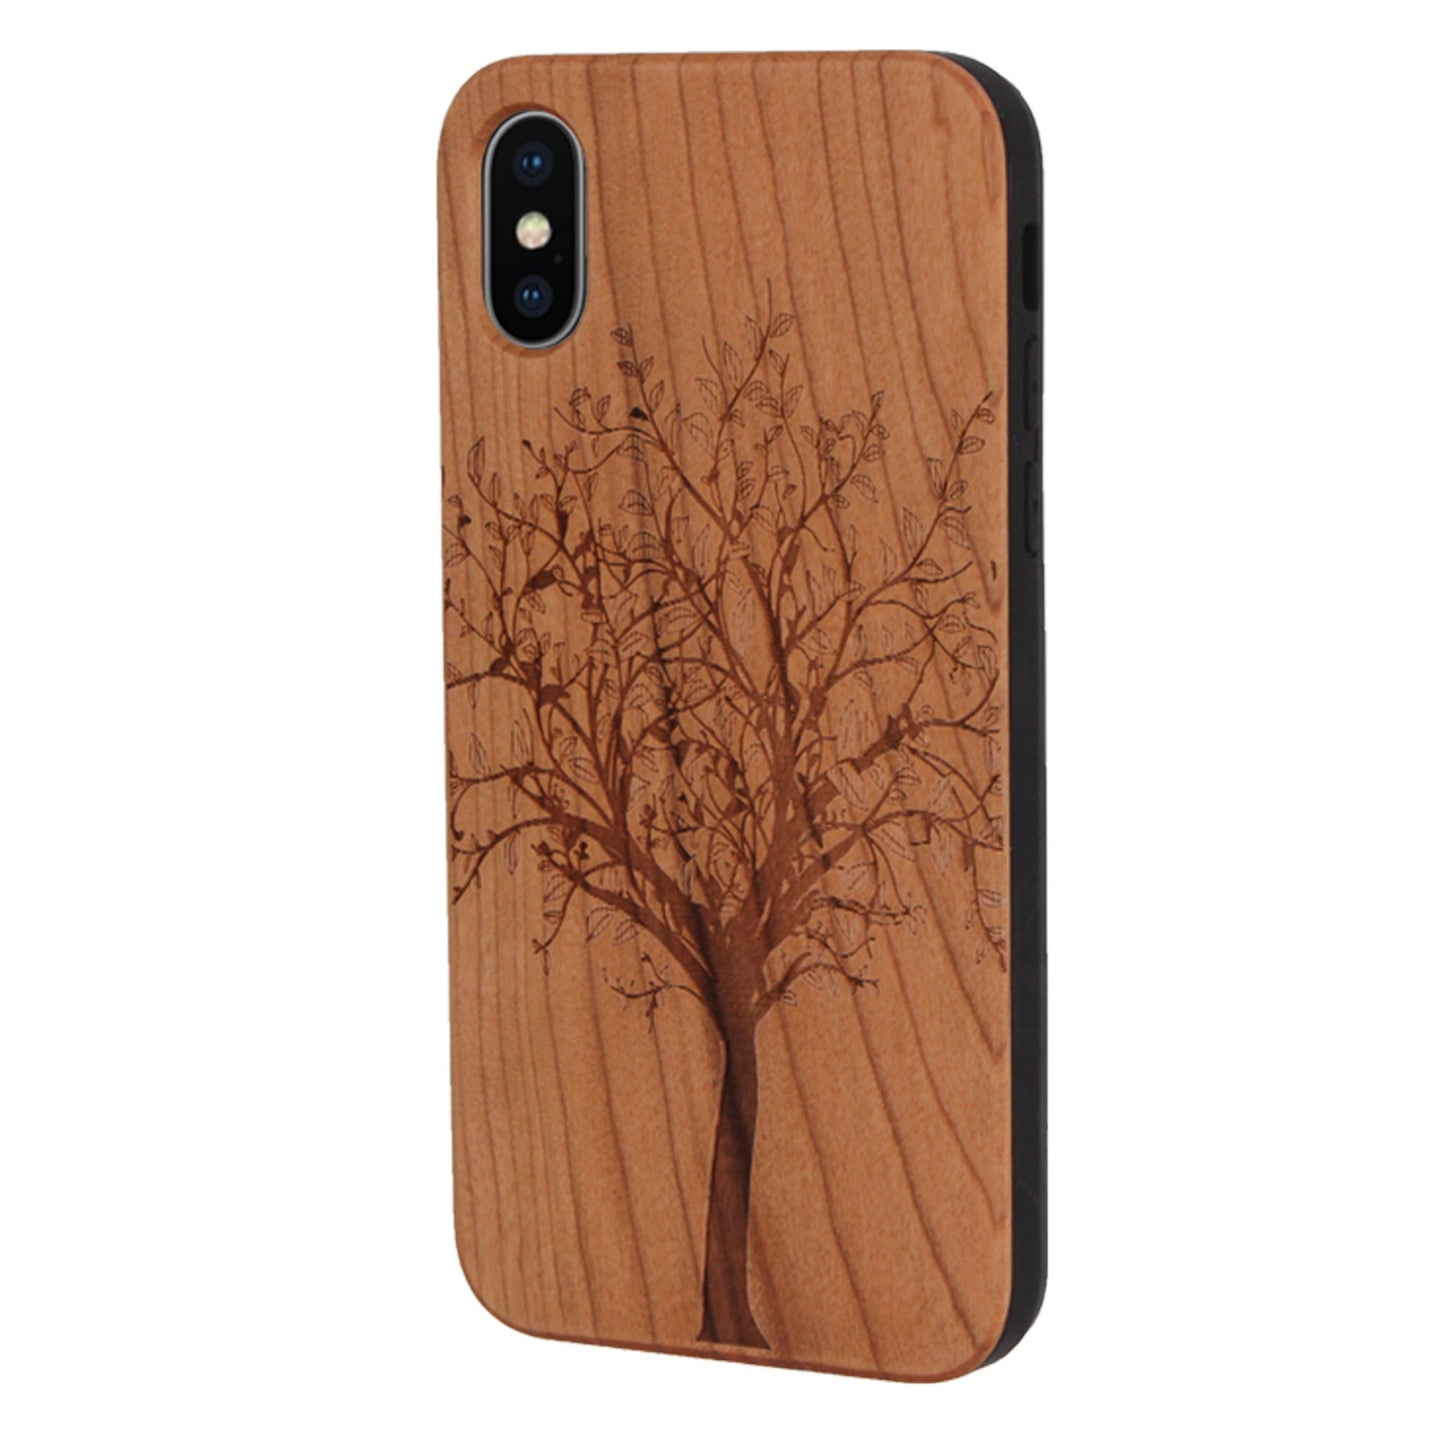 Tree of Life Eden case made of cherry wood for iPhone X/XS